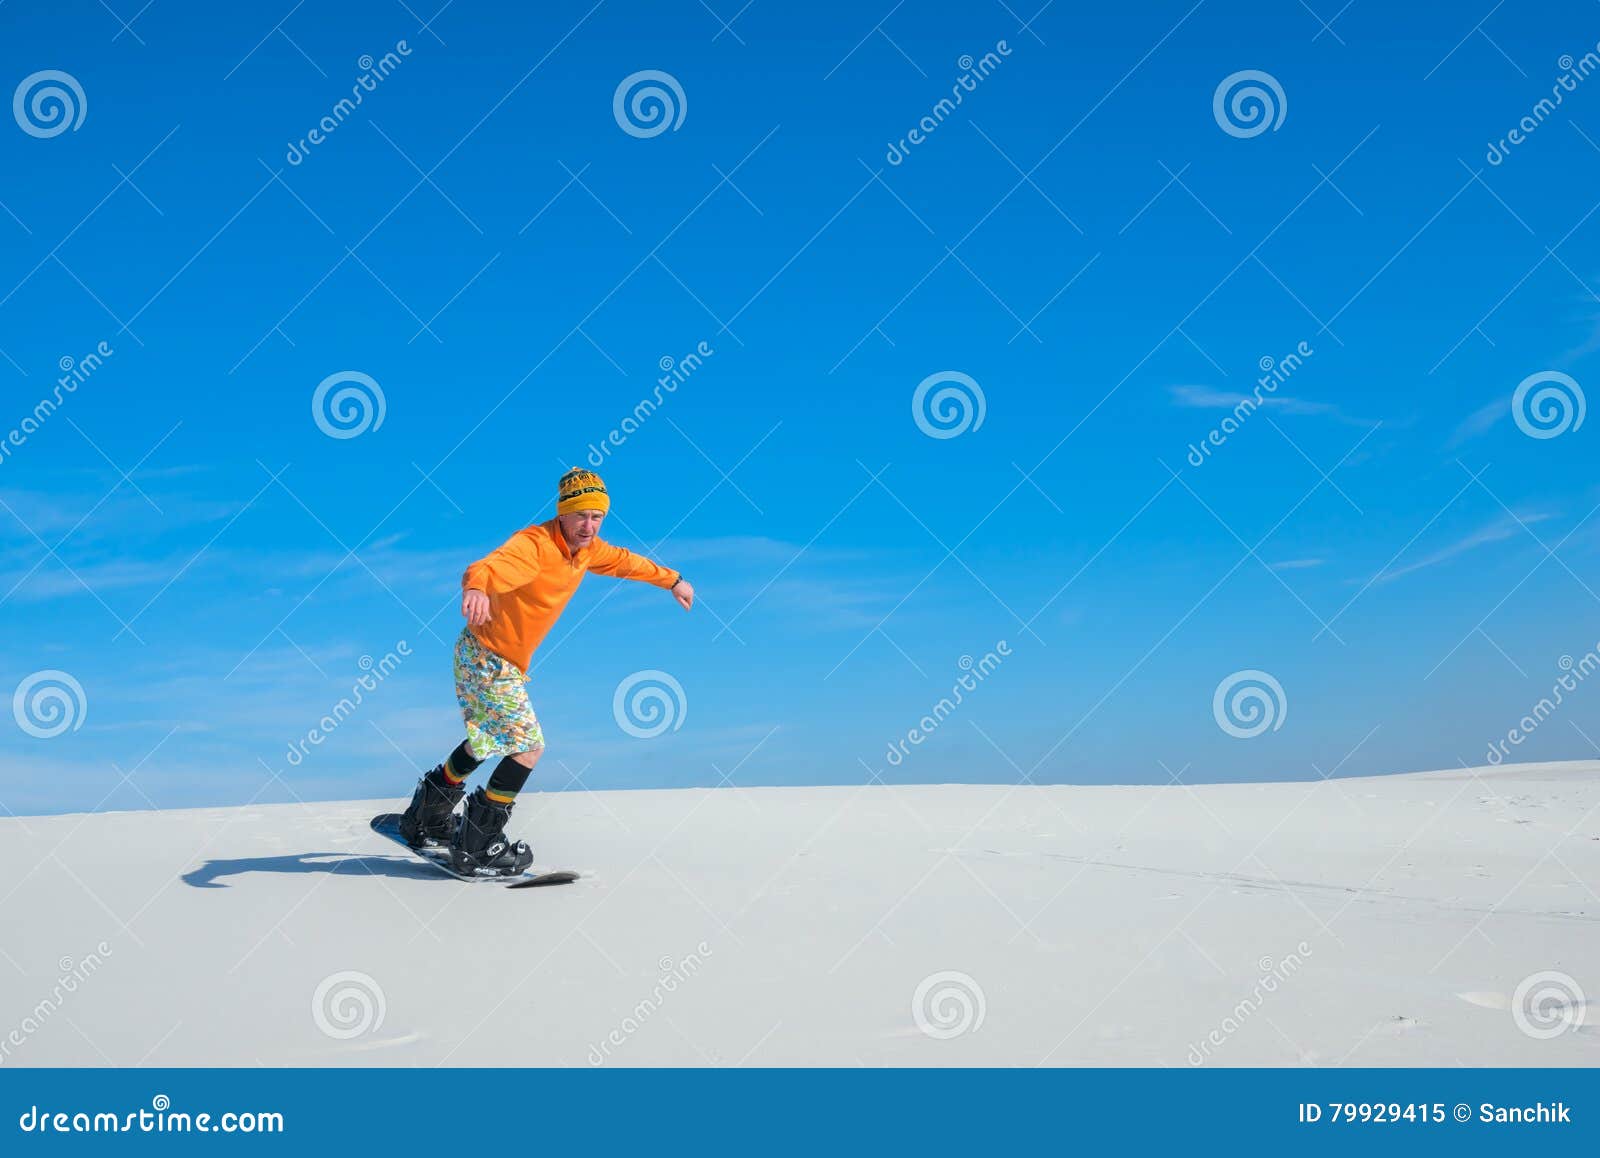 Sand Boarder Slides Down the Slope Stock Image - Image of authentic ...